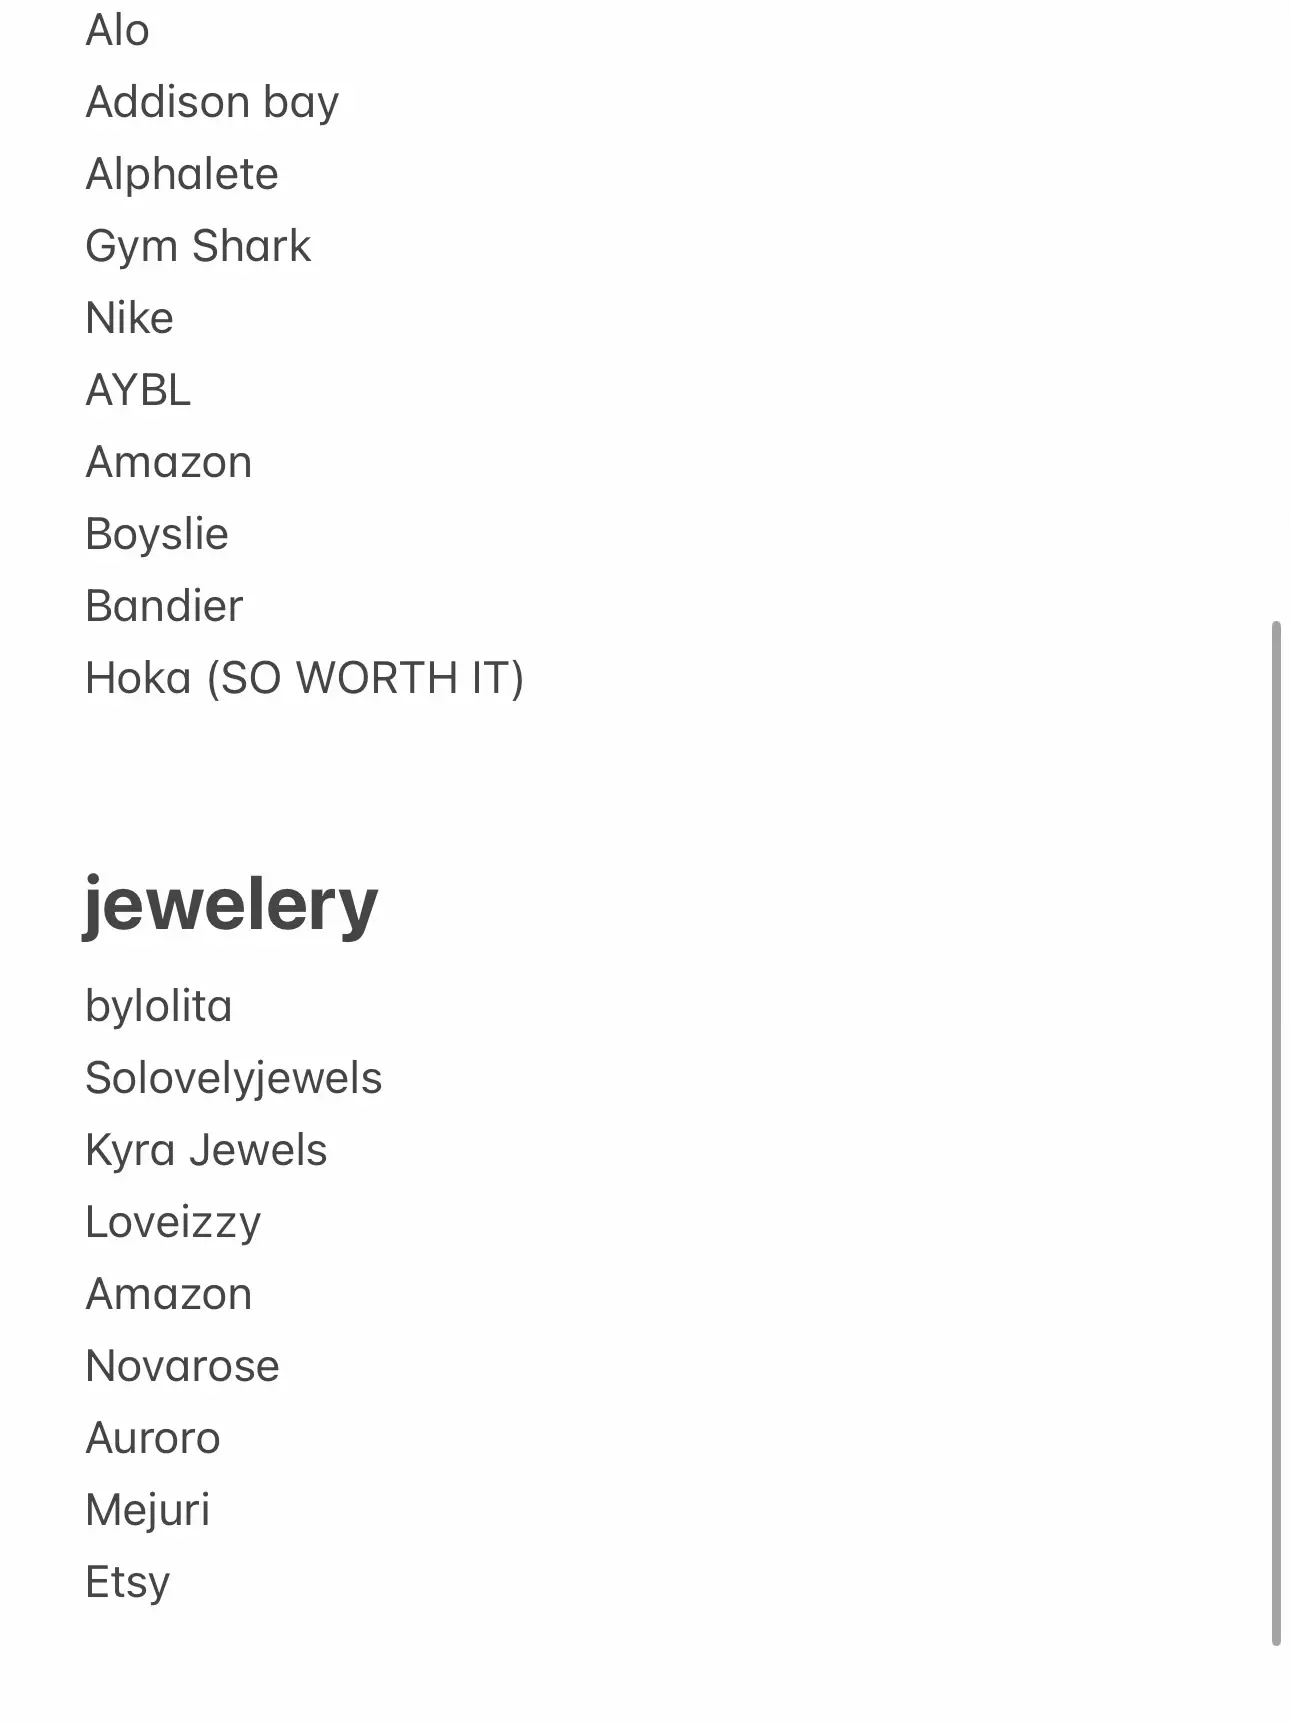  A list of jewelry brands with their corresponding urls.